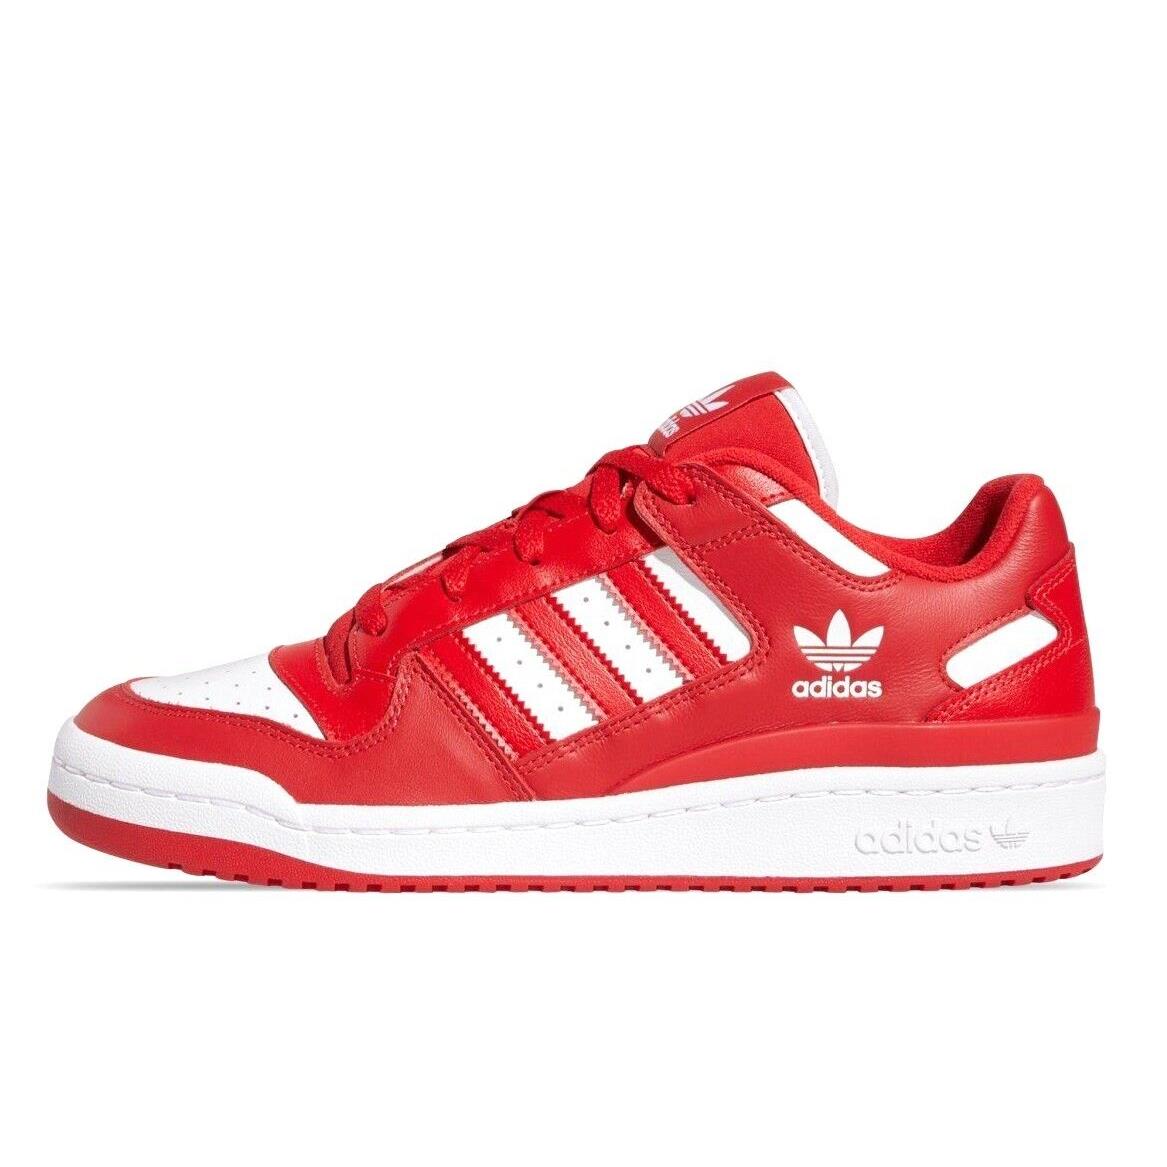 Mens Adidas Forum Low CL Originals Red White Casual Basketball Athletic Shoes - Red